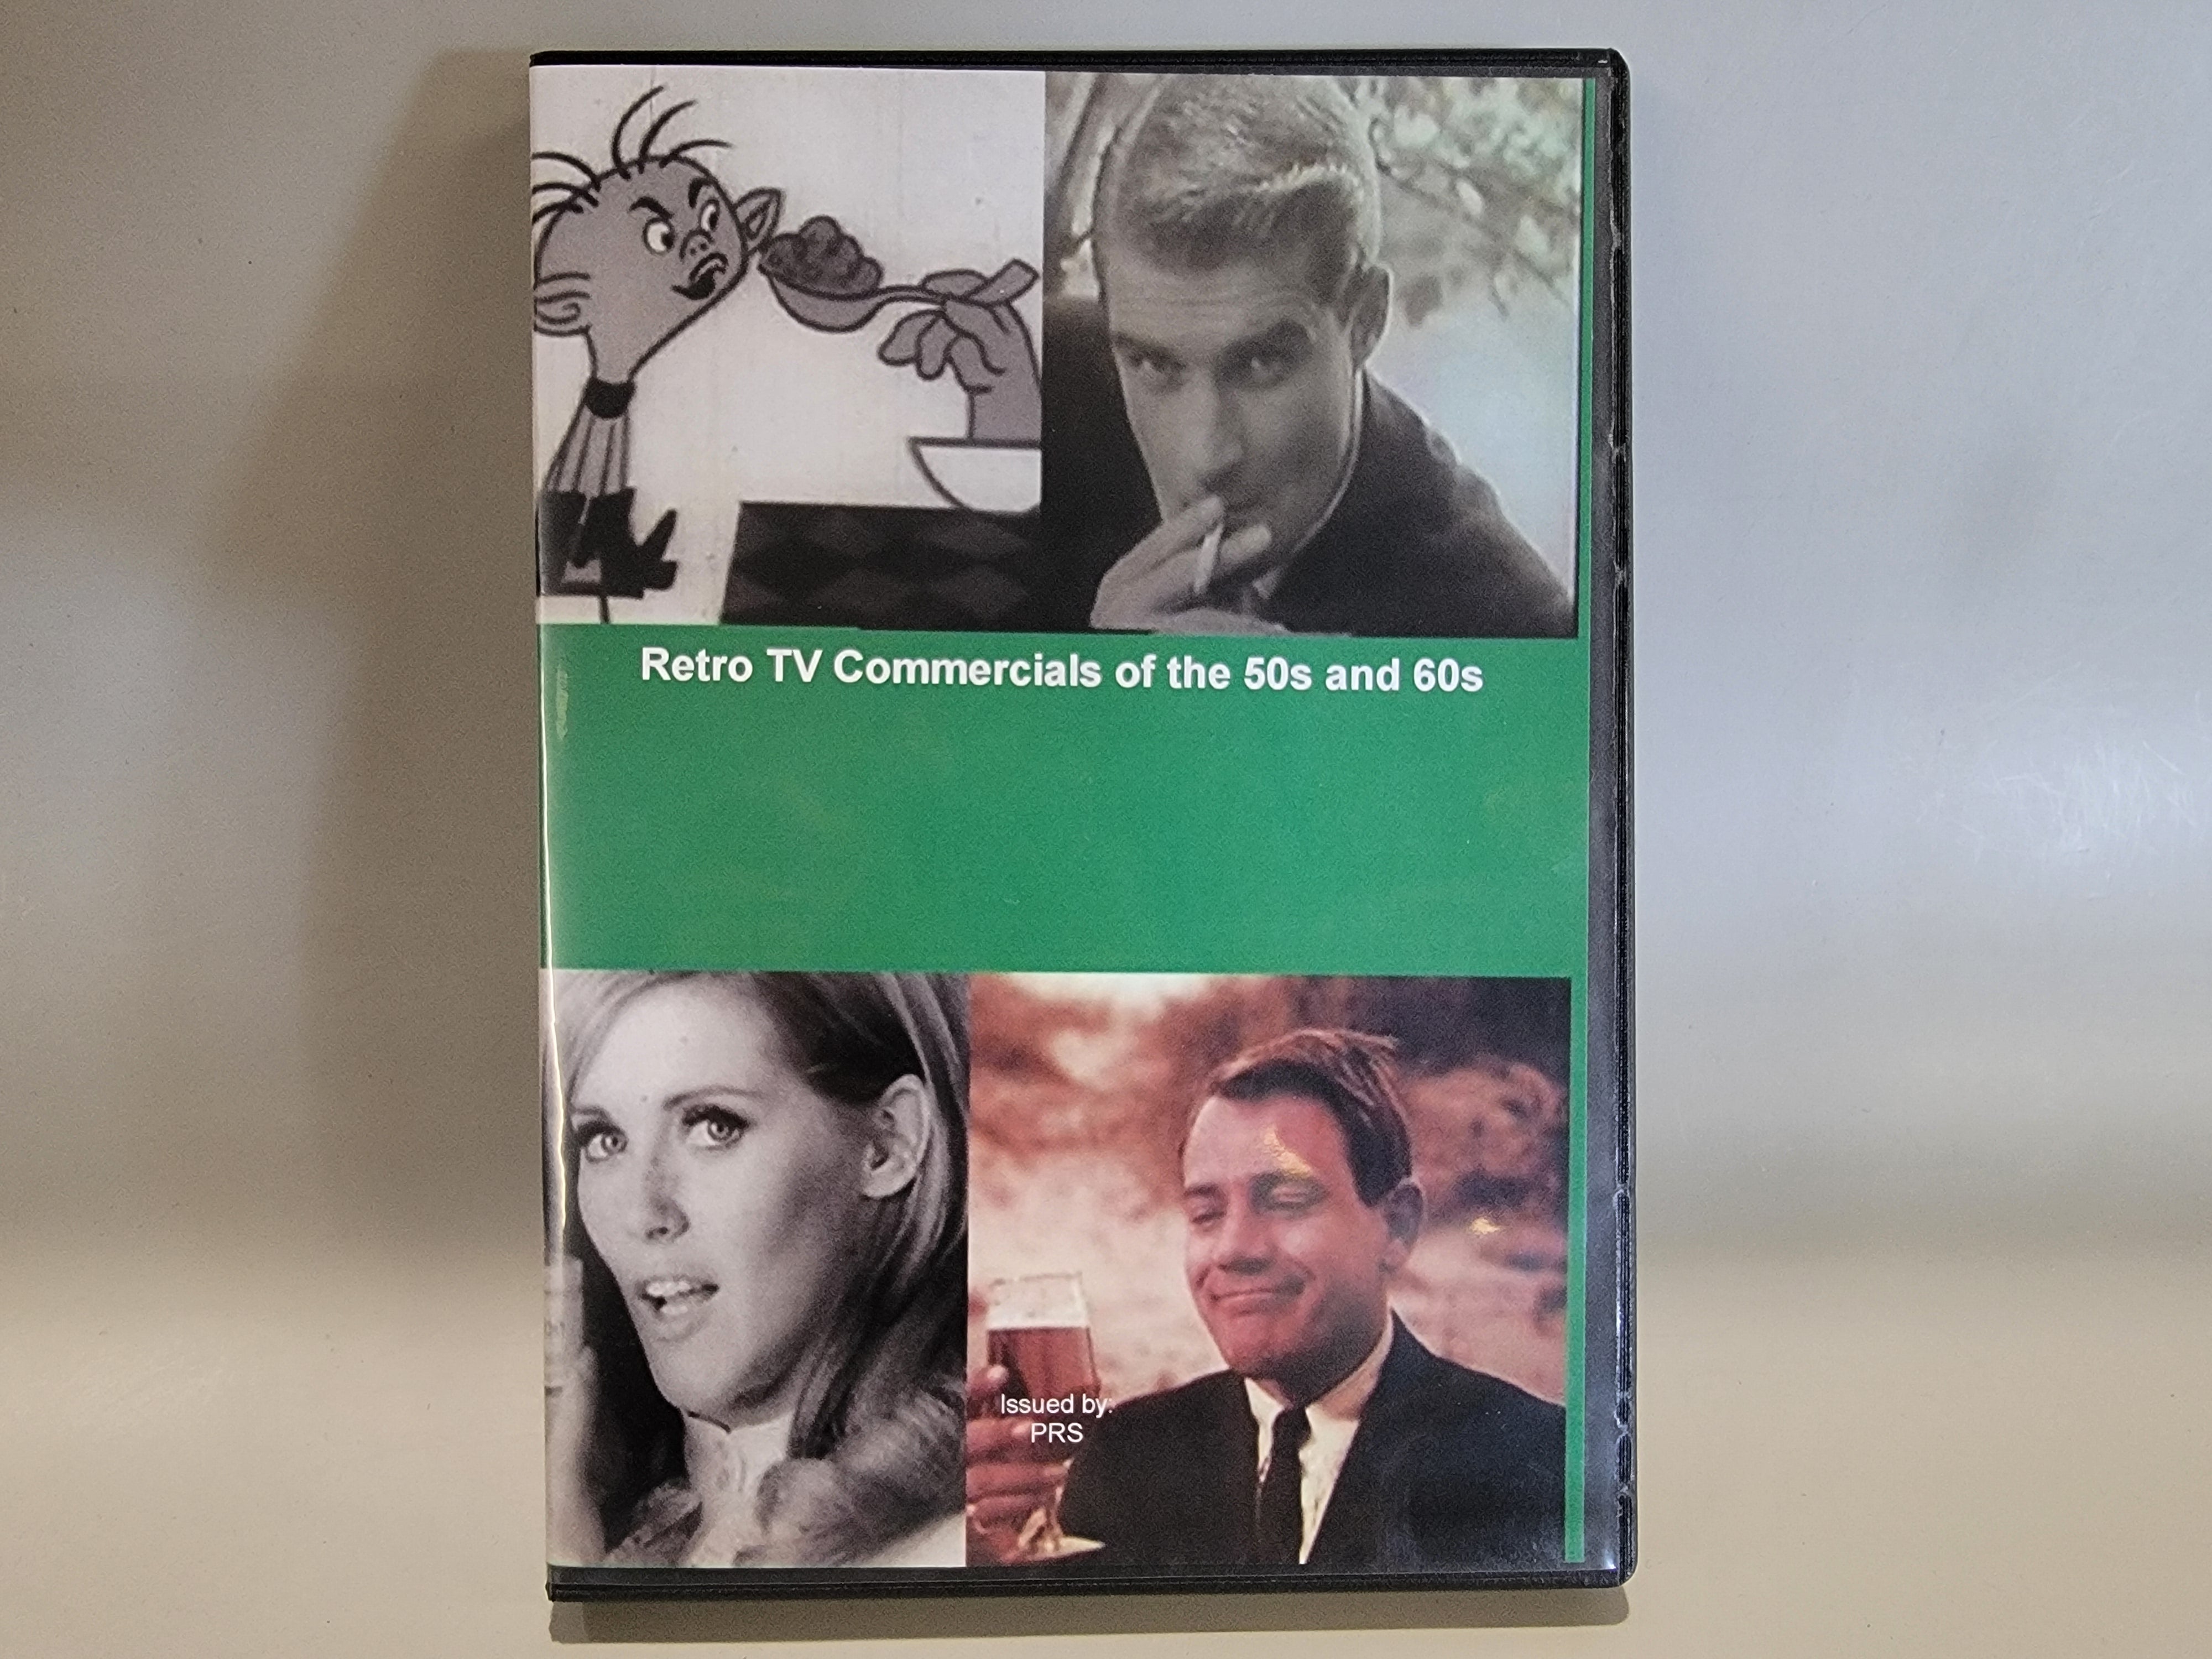 RETRO TV COMMERCIALS OF THE 50S AND 60S DVD [USED]